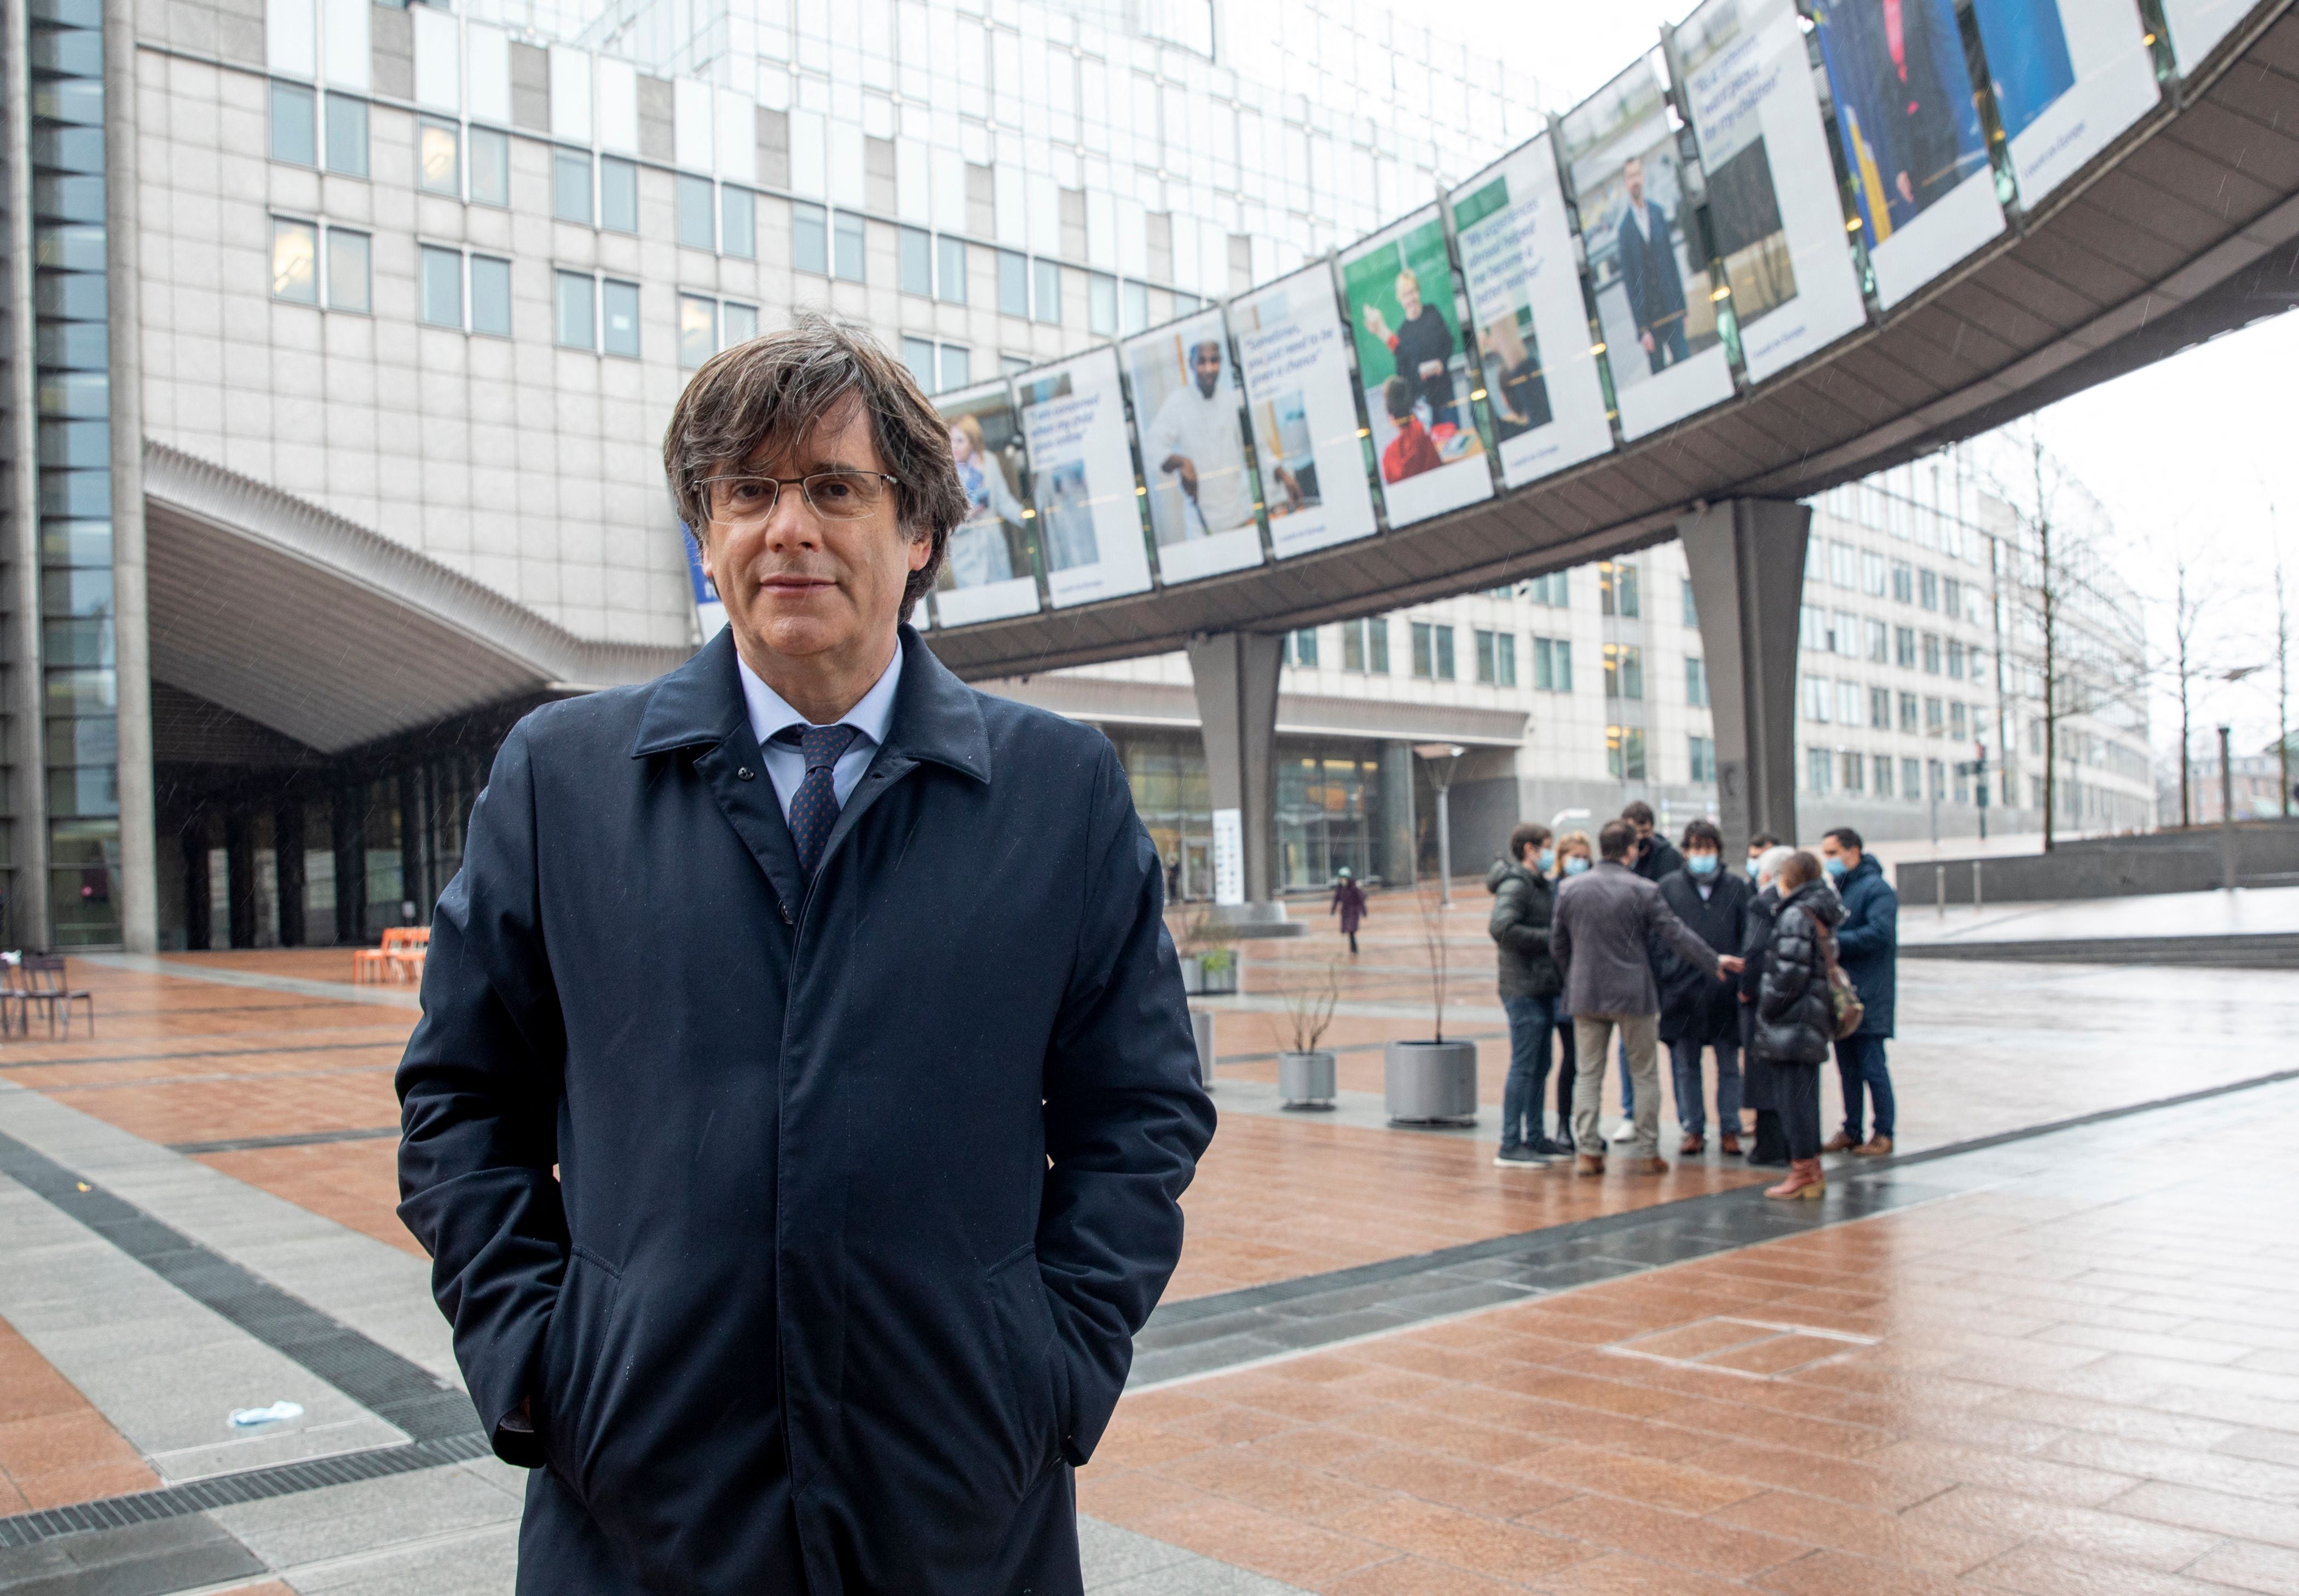 Carles Puigdemont outside the EU parliament building in Brussels